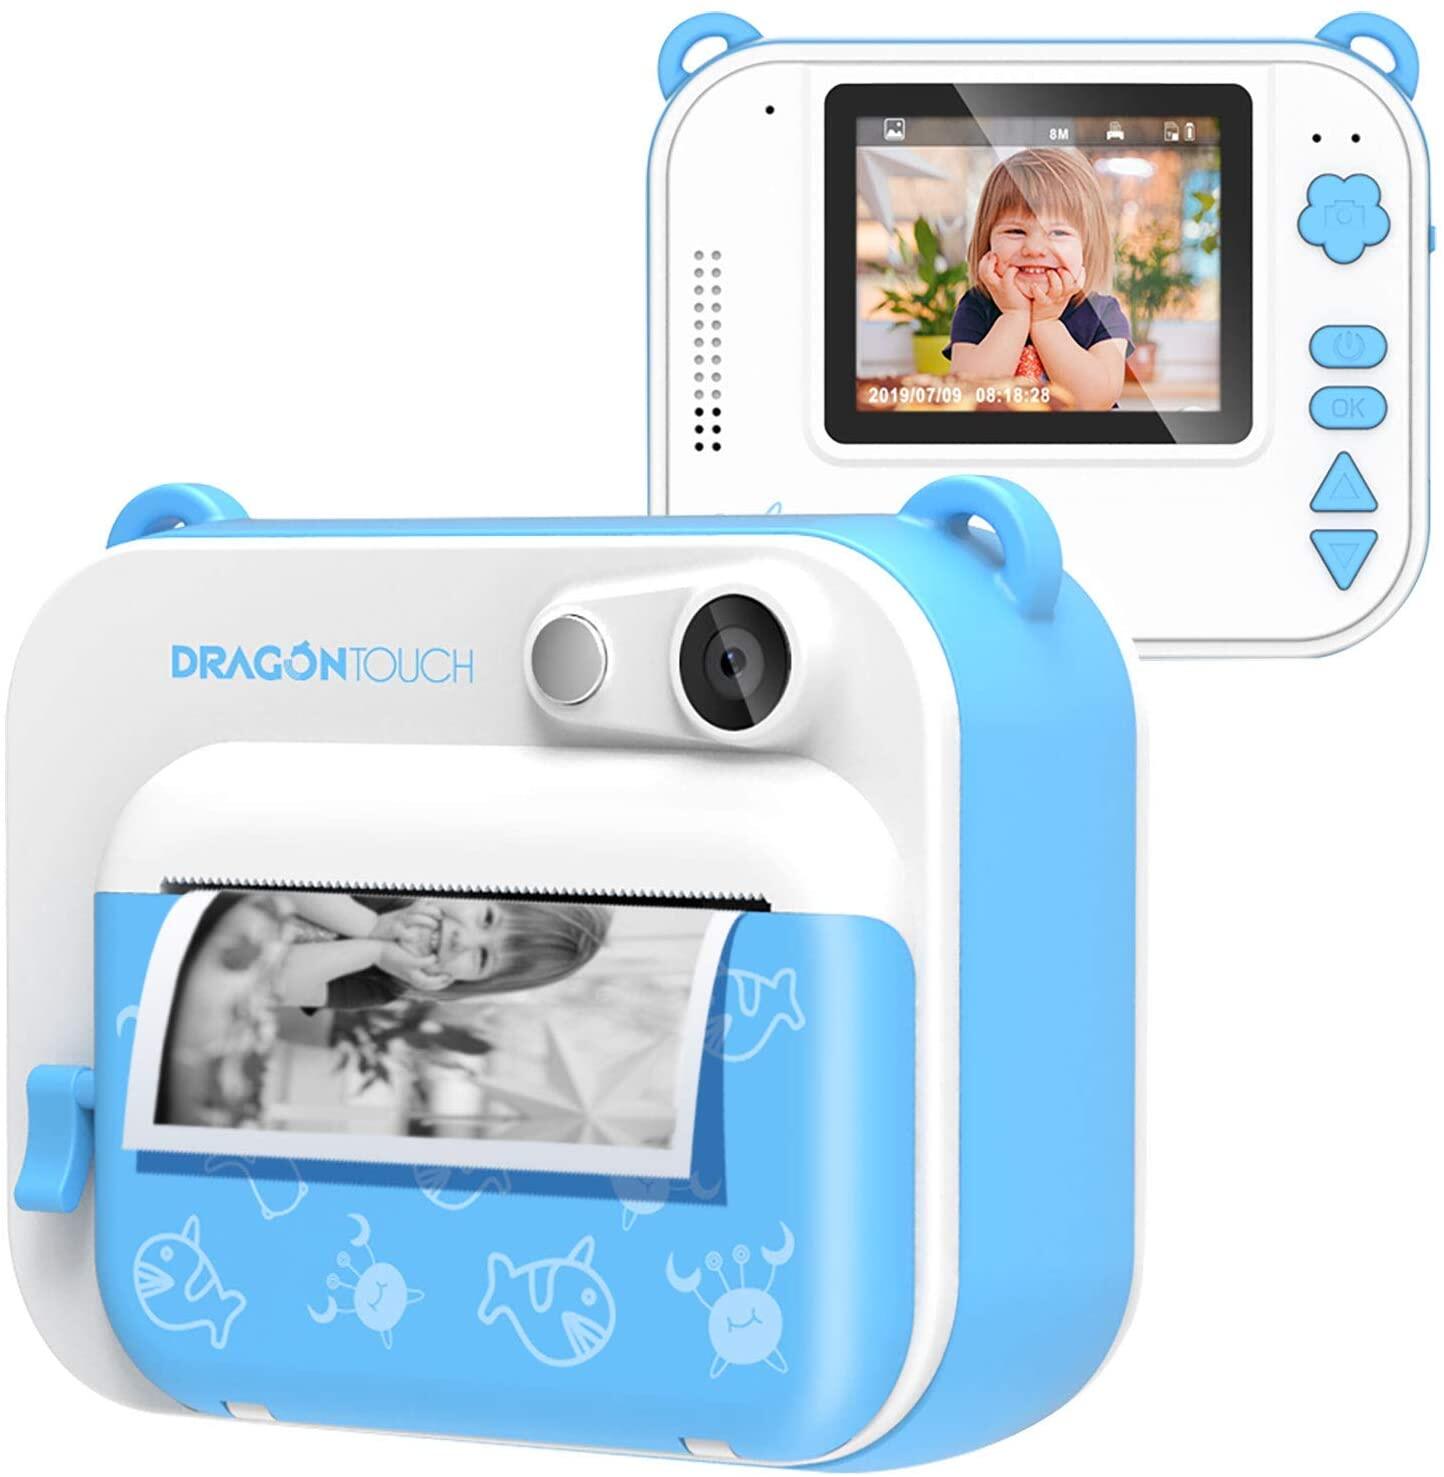 Dragon Touch InstantFun Instant Print Camera for Kids, Zero Ink Toy Camera with Print Paper, Cartoon Sticker, Color Pencils, Portable Digital Creative Print Camera for Boys and Girls - Blue